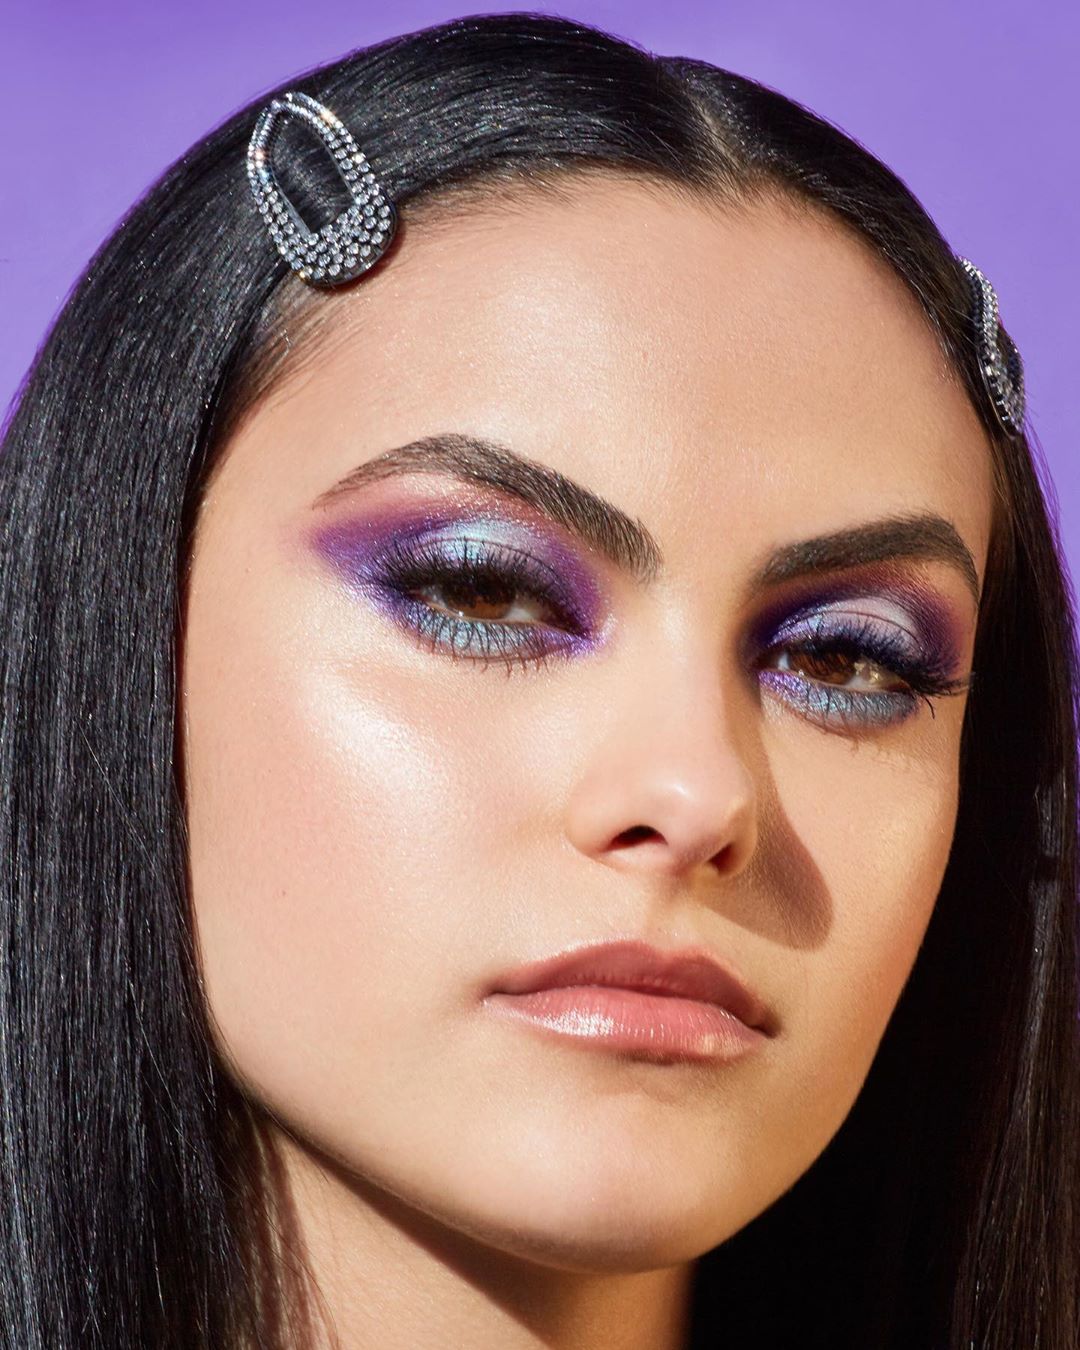 Urban Decay Cosmetics - UD Global Citizen @camimendes is serving us all the looks with the all-new NAKED Ultraviolet Eyeshadow Palette—tap to shop yours 💜 #UrbanDecay #NAKEDUltraviolet #AllEyesOnYou #...